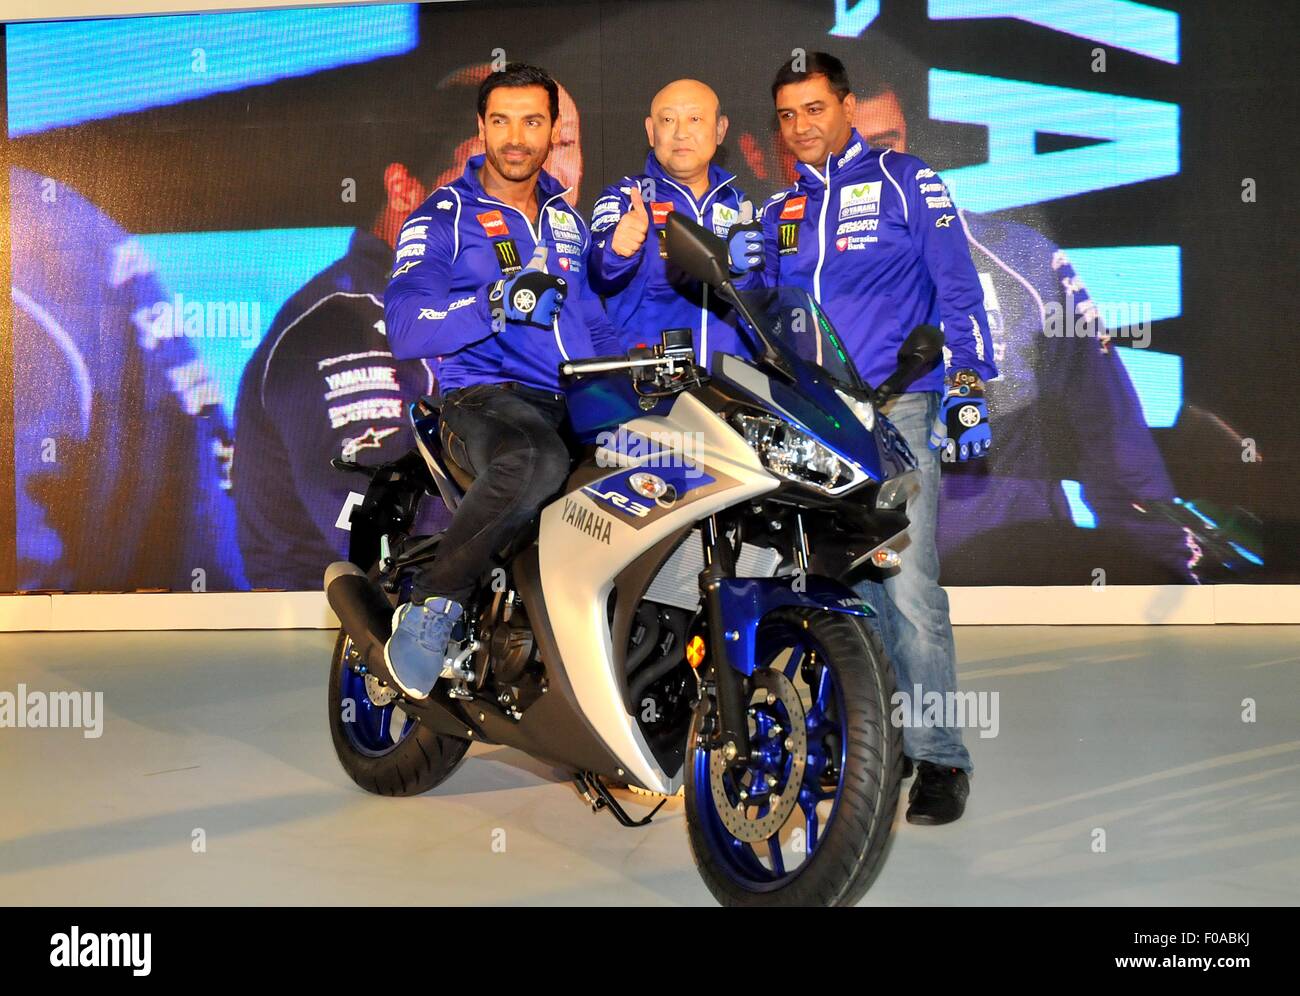 Uttar Pradesh, India. 11th Aug, 2015. Bollywood Acotro johan Ebraiam, Mr. Masaki Asano, Managing Director, Yamaha Motor India Sales Pvt. Ltd and Mr. Roy Kurian, Vice President- Sales & Marketing, Yamaha Motor India Sales Pvt. Ltd today, launched yet another exciting offering – the YZF-R3 sports model. The grand India launch took place at the most suited racer's paradise, The Budhha International Circuit. The YZF – R3 will cost the Indian buyers Rs. 3, 25,000 and will be available at select authorised Yamaha dealerships in two exciting colour schemes - Racing Blue and Black Lightning. © PACIFIC Stock Photo